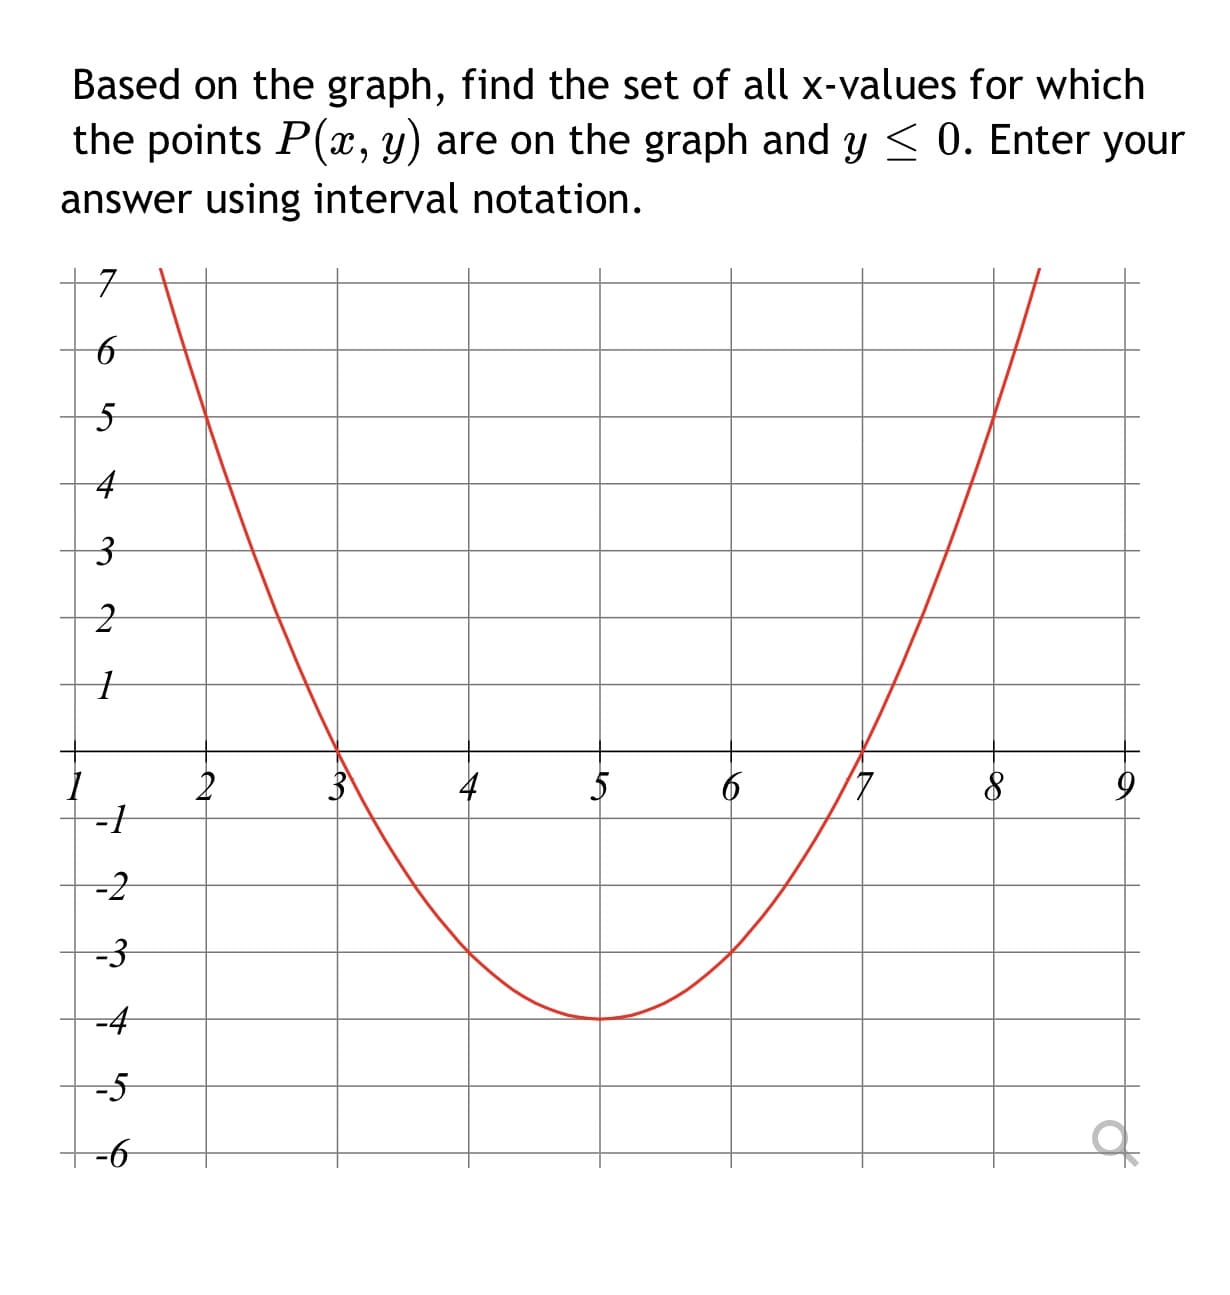 Based on the graph, find the set of all x-values for which
the points P(x, y) are on the graph and y < 0. Enter your
answer using interval notation.
구
2
4
5
6
-2
-3
